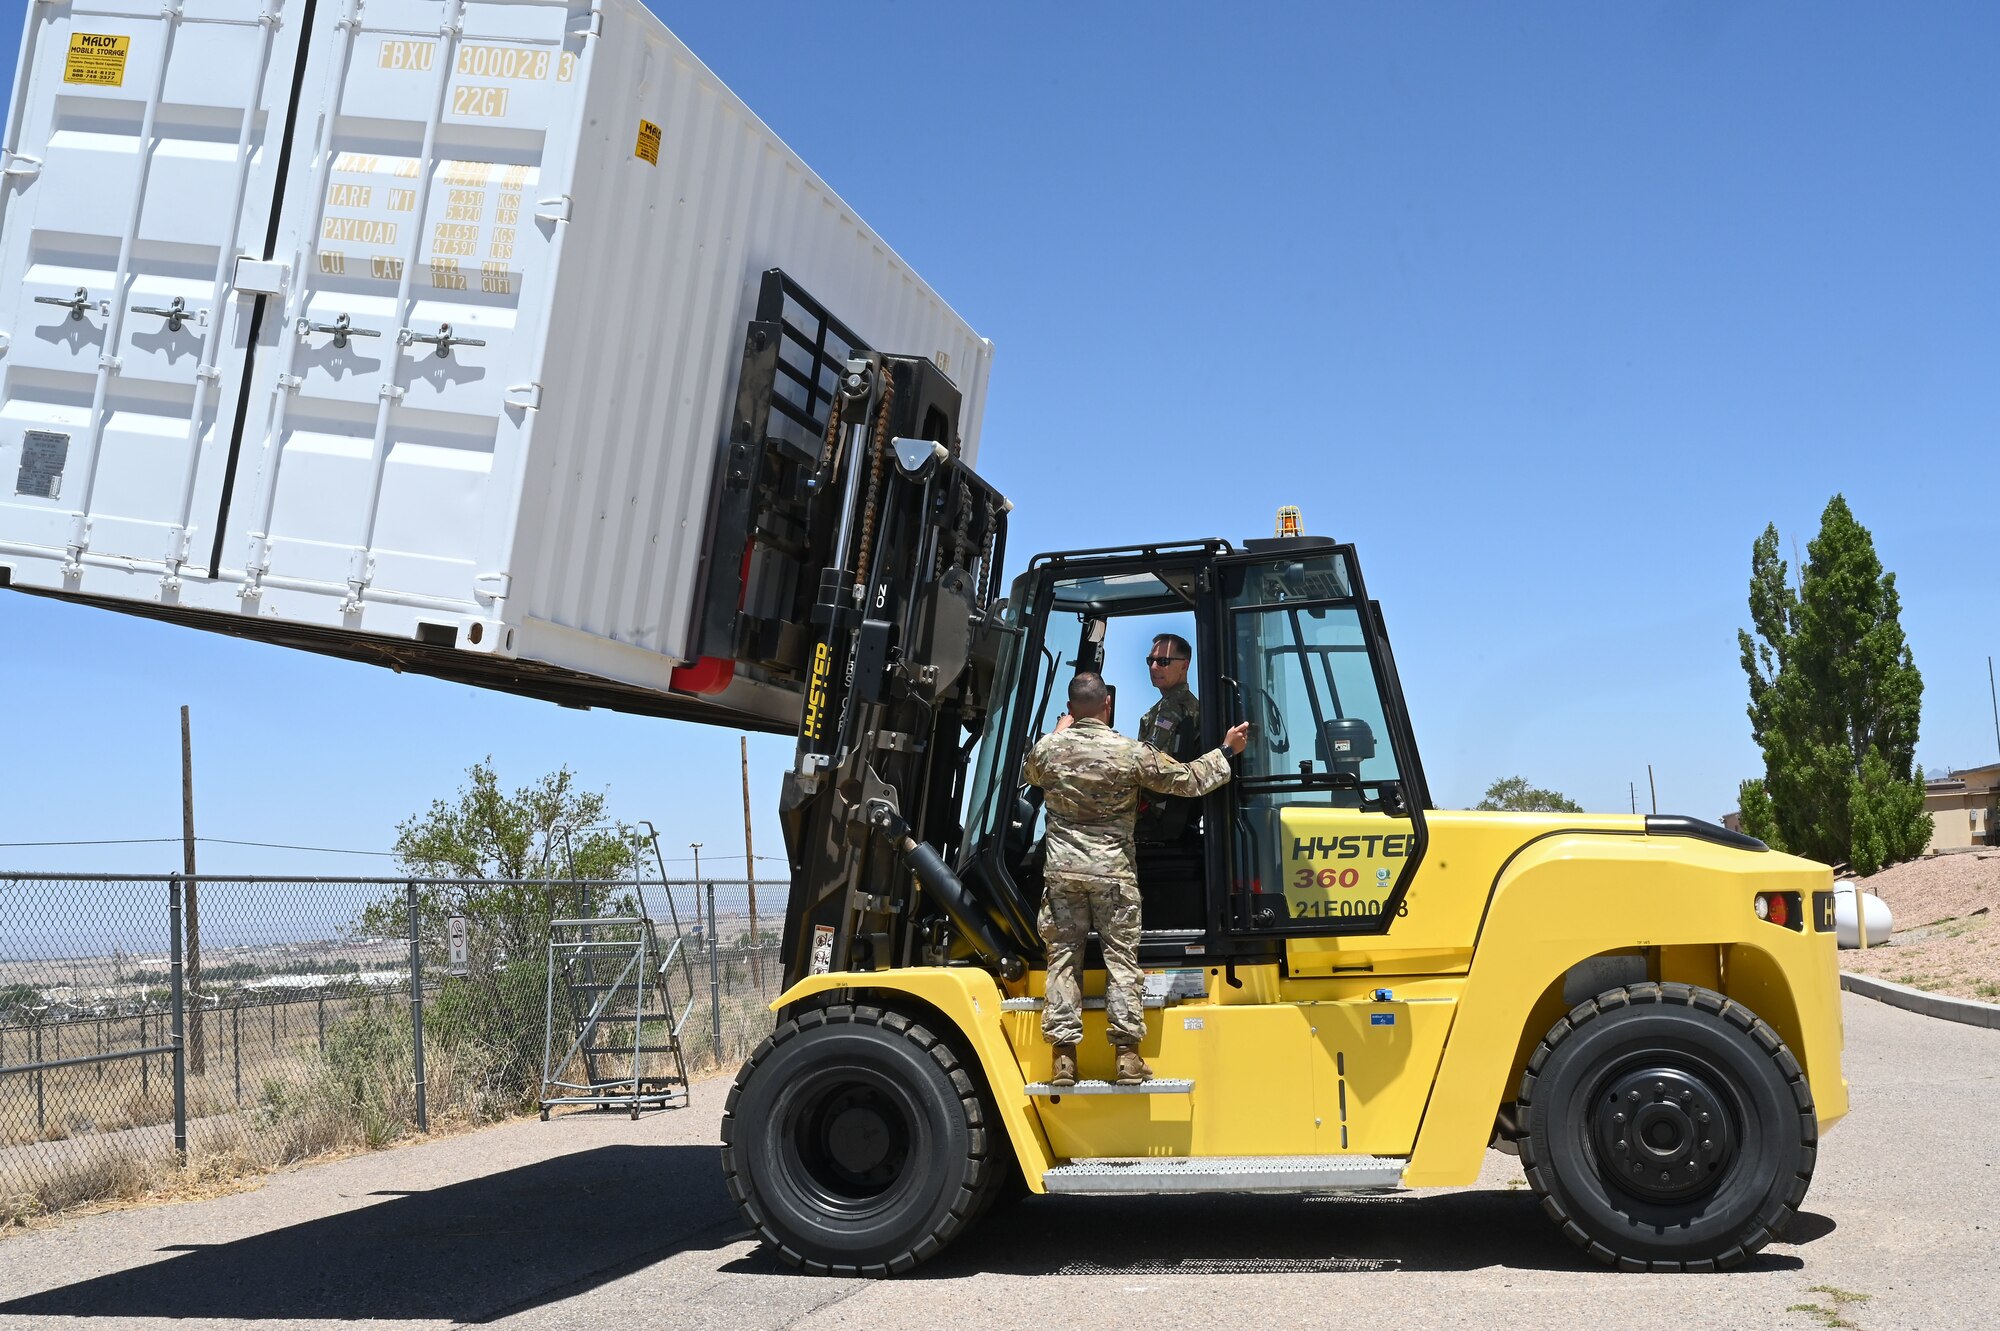 A man operates a forklift.